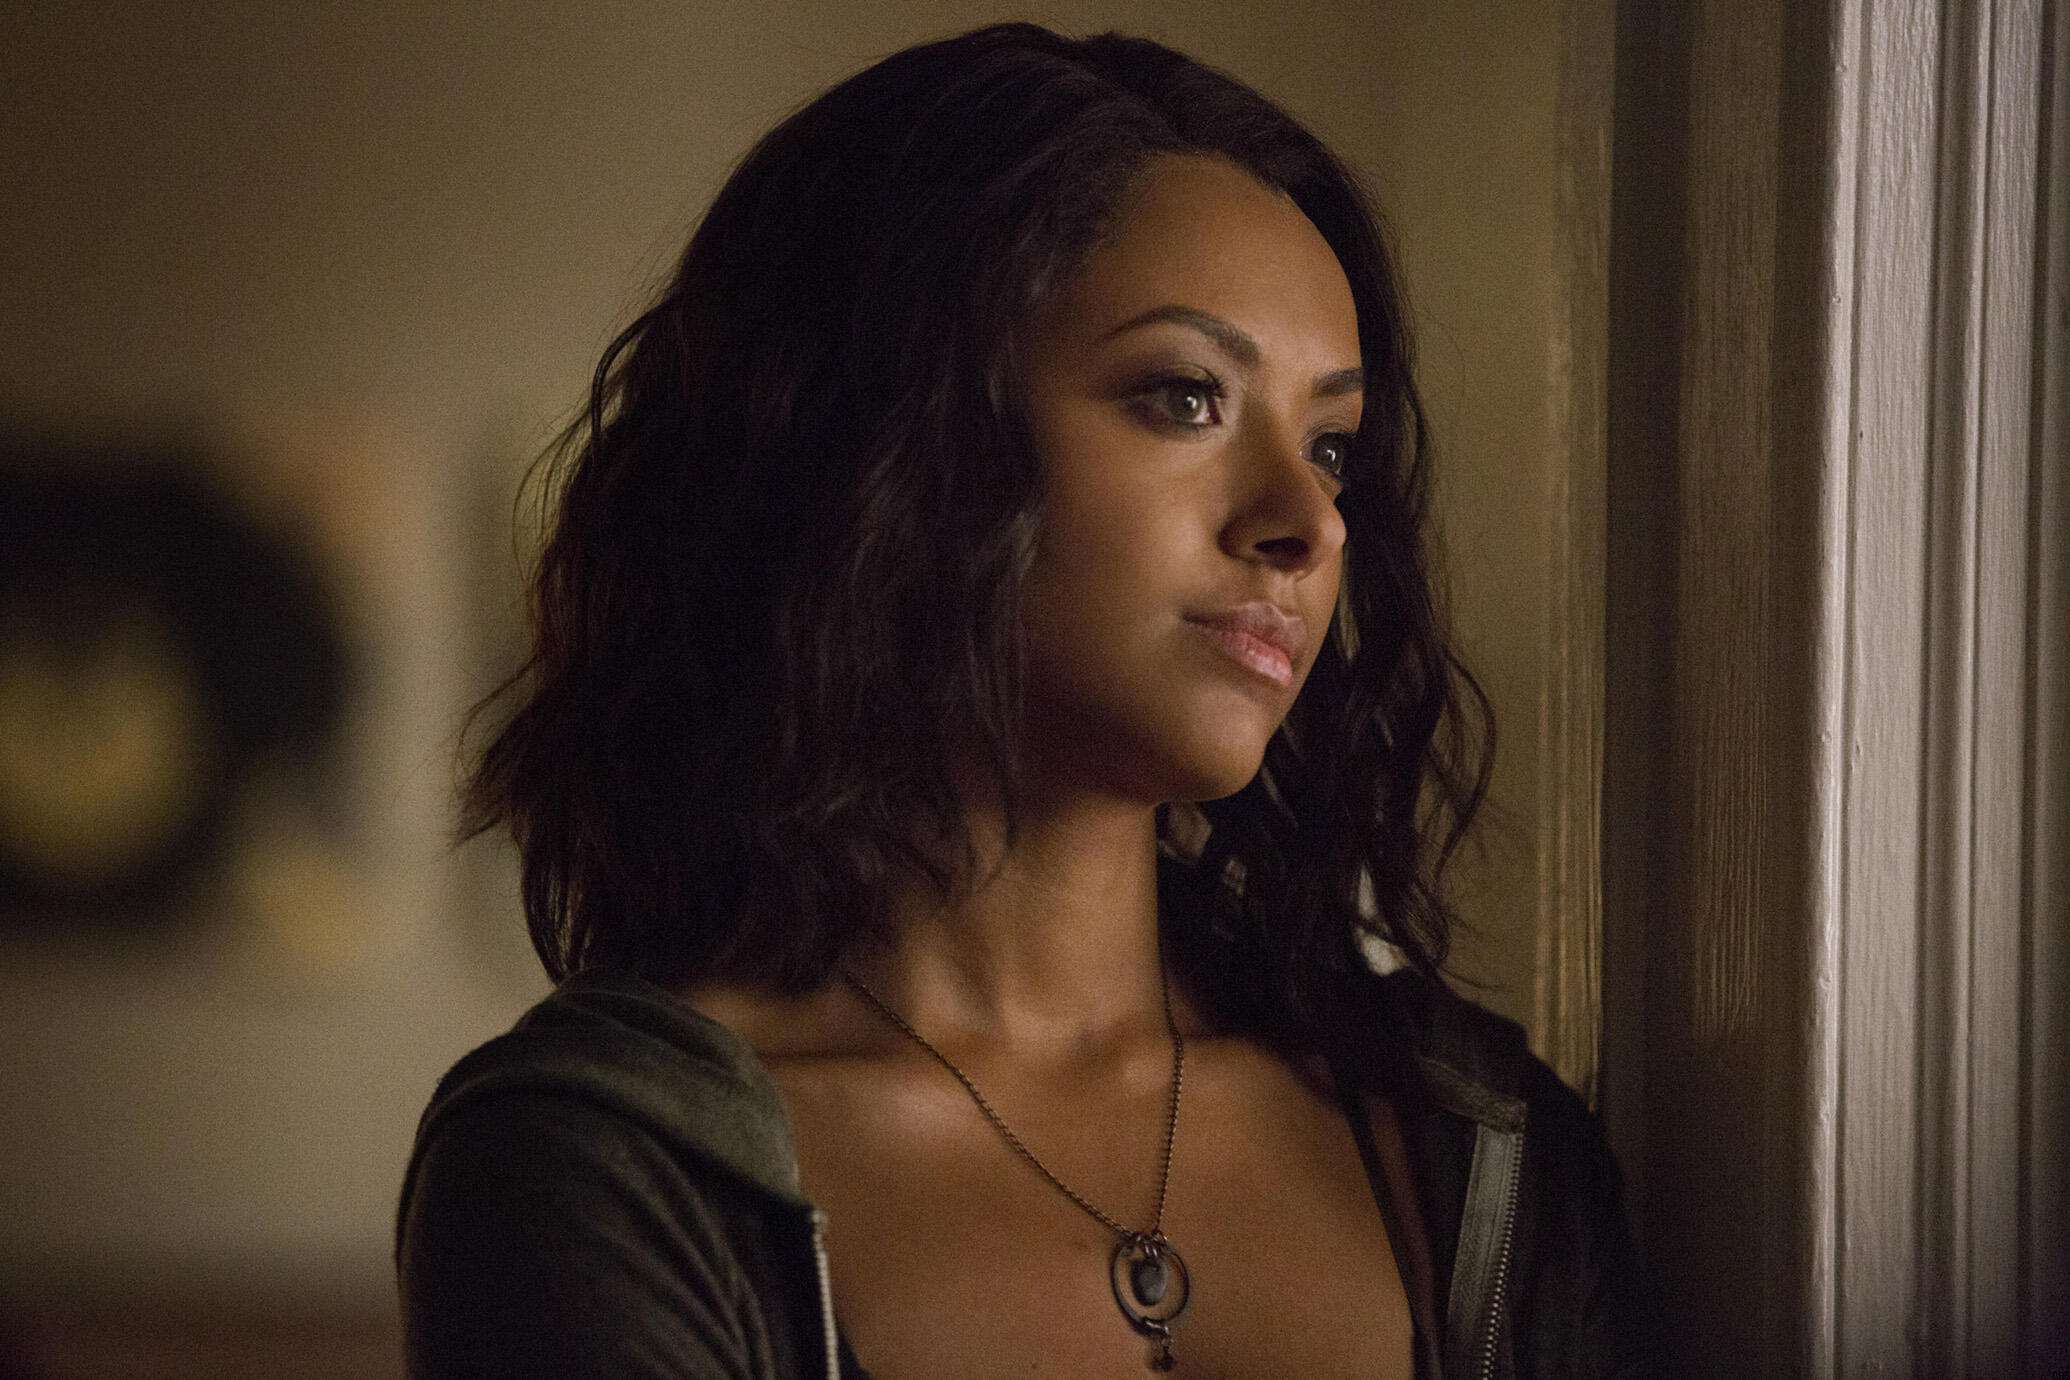 A Tribute to The Vampire Diaries' Bonnie Bennett, A Fierce Witch Who N...